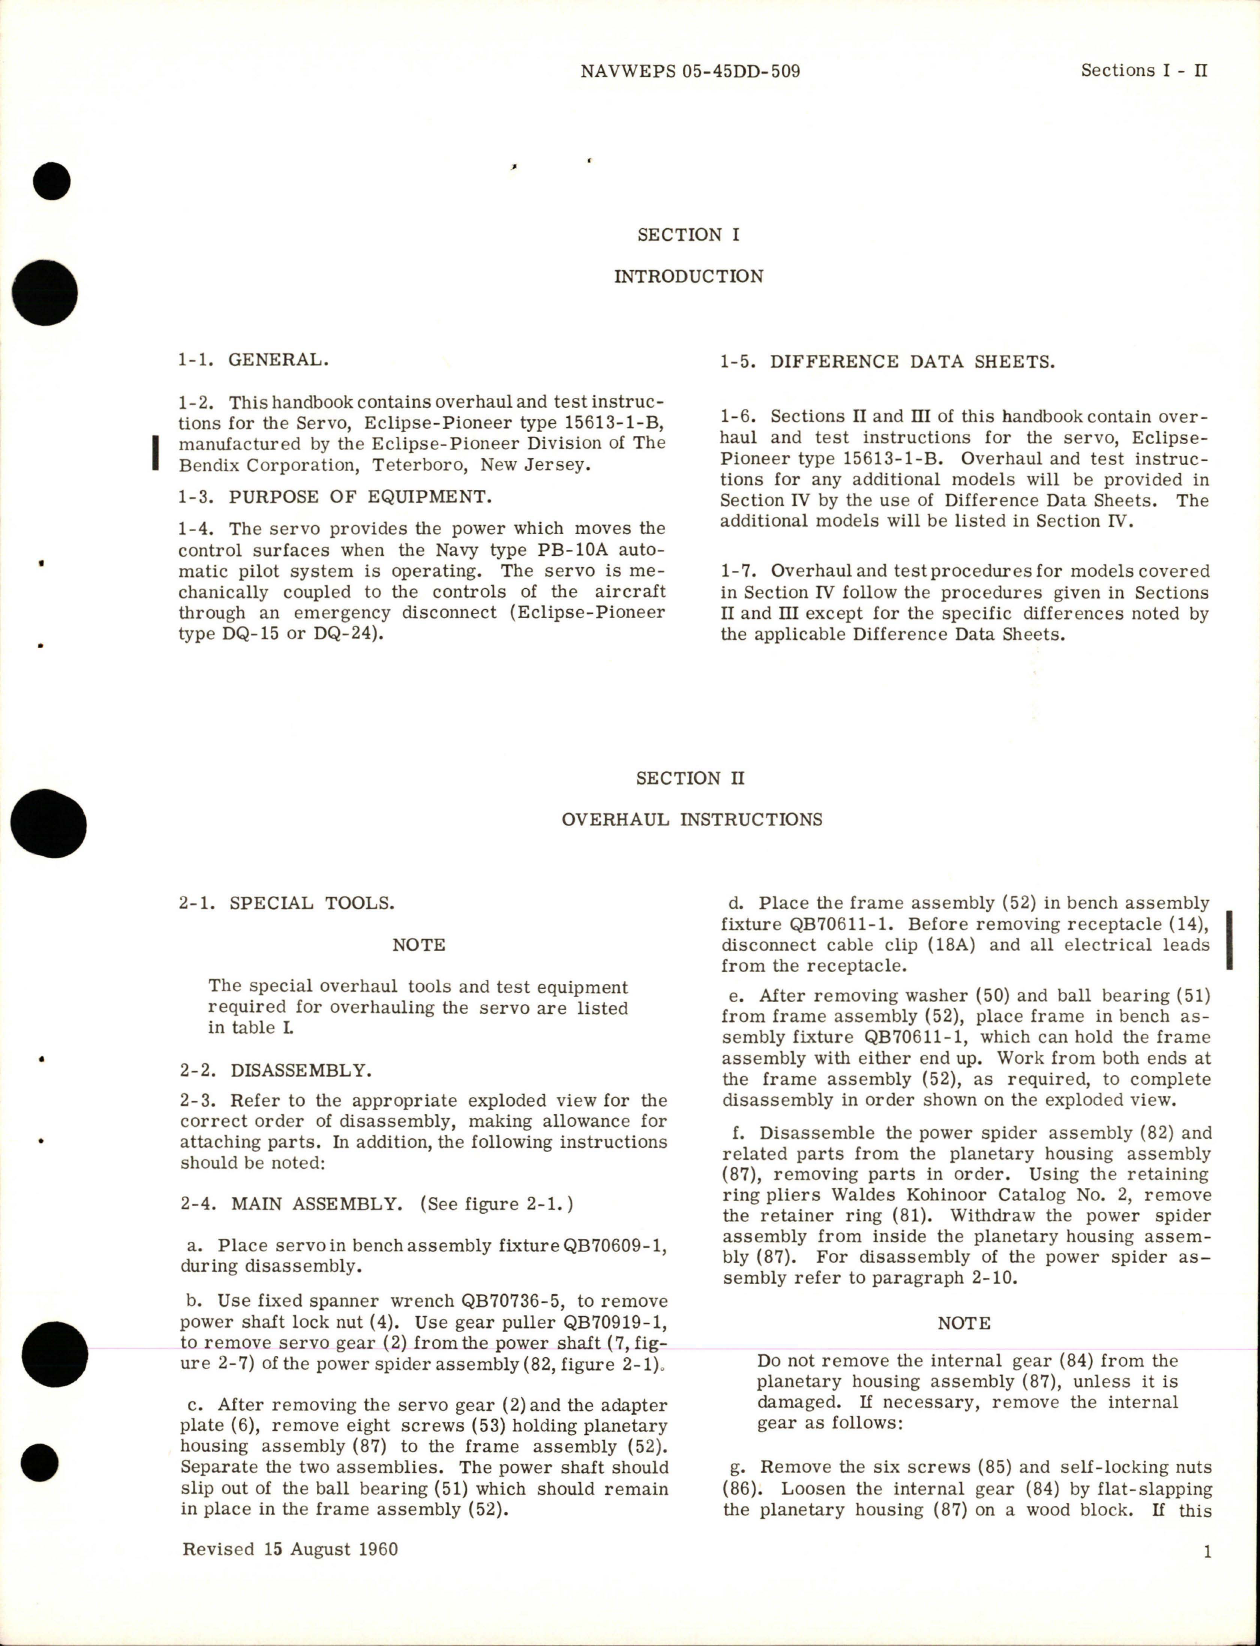 Sample page 5 from AirCorps Library document: Overhaul Instructions for Servo - Part 15613-1-B and 15613-2-B